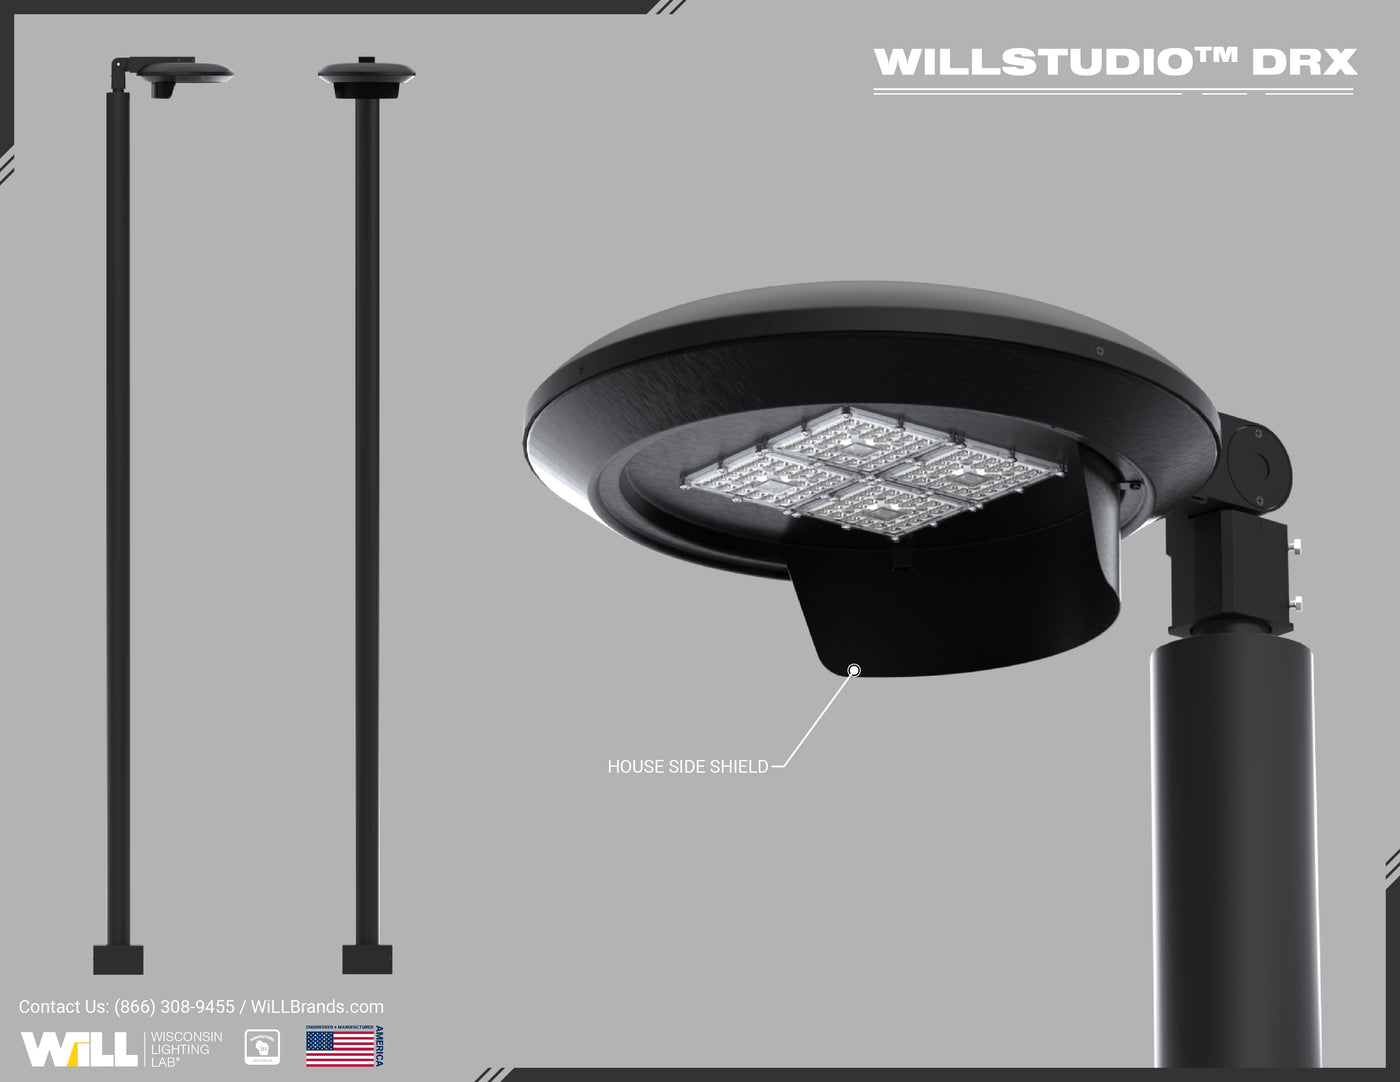 WiLLstudio DRX With House Side Shield